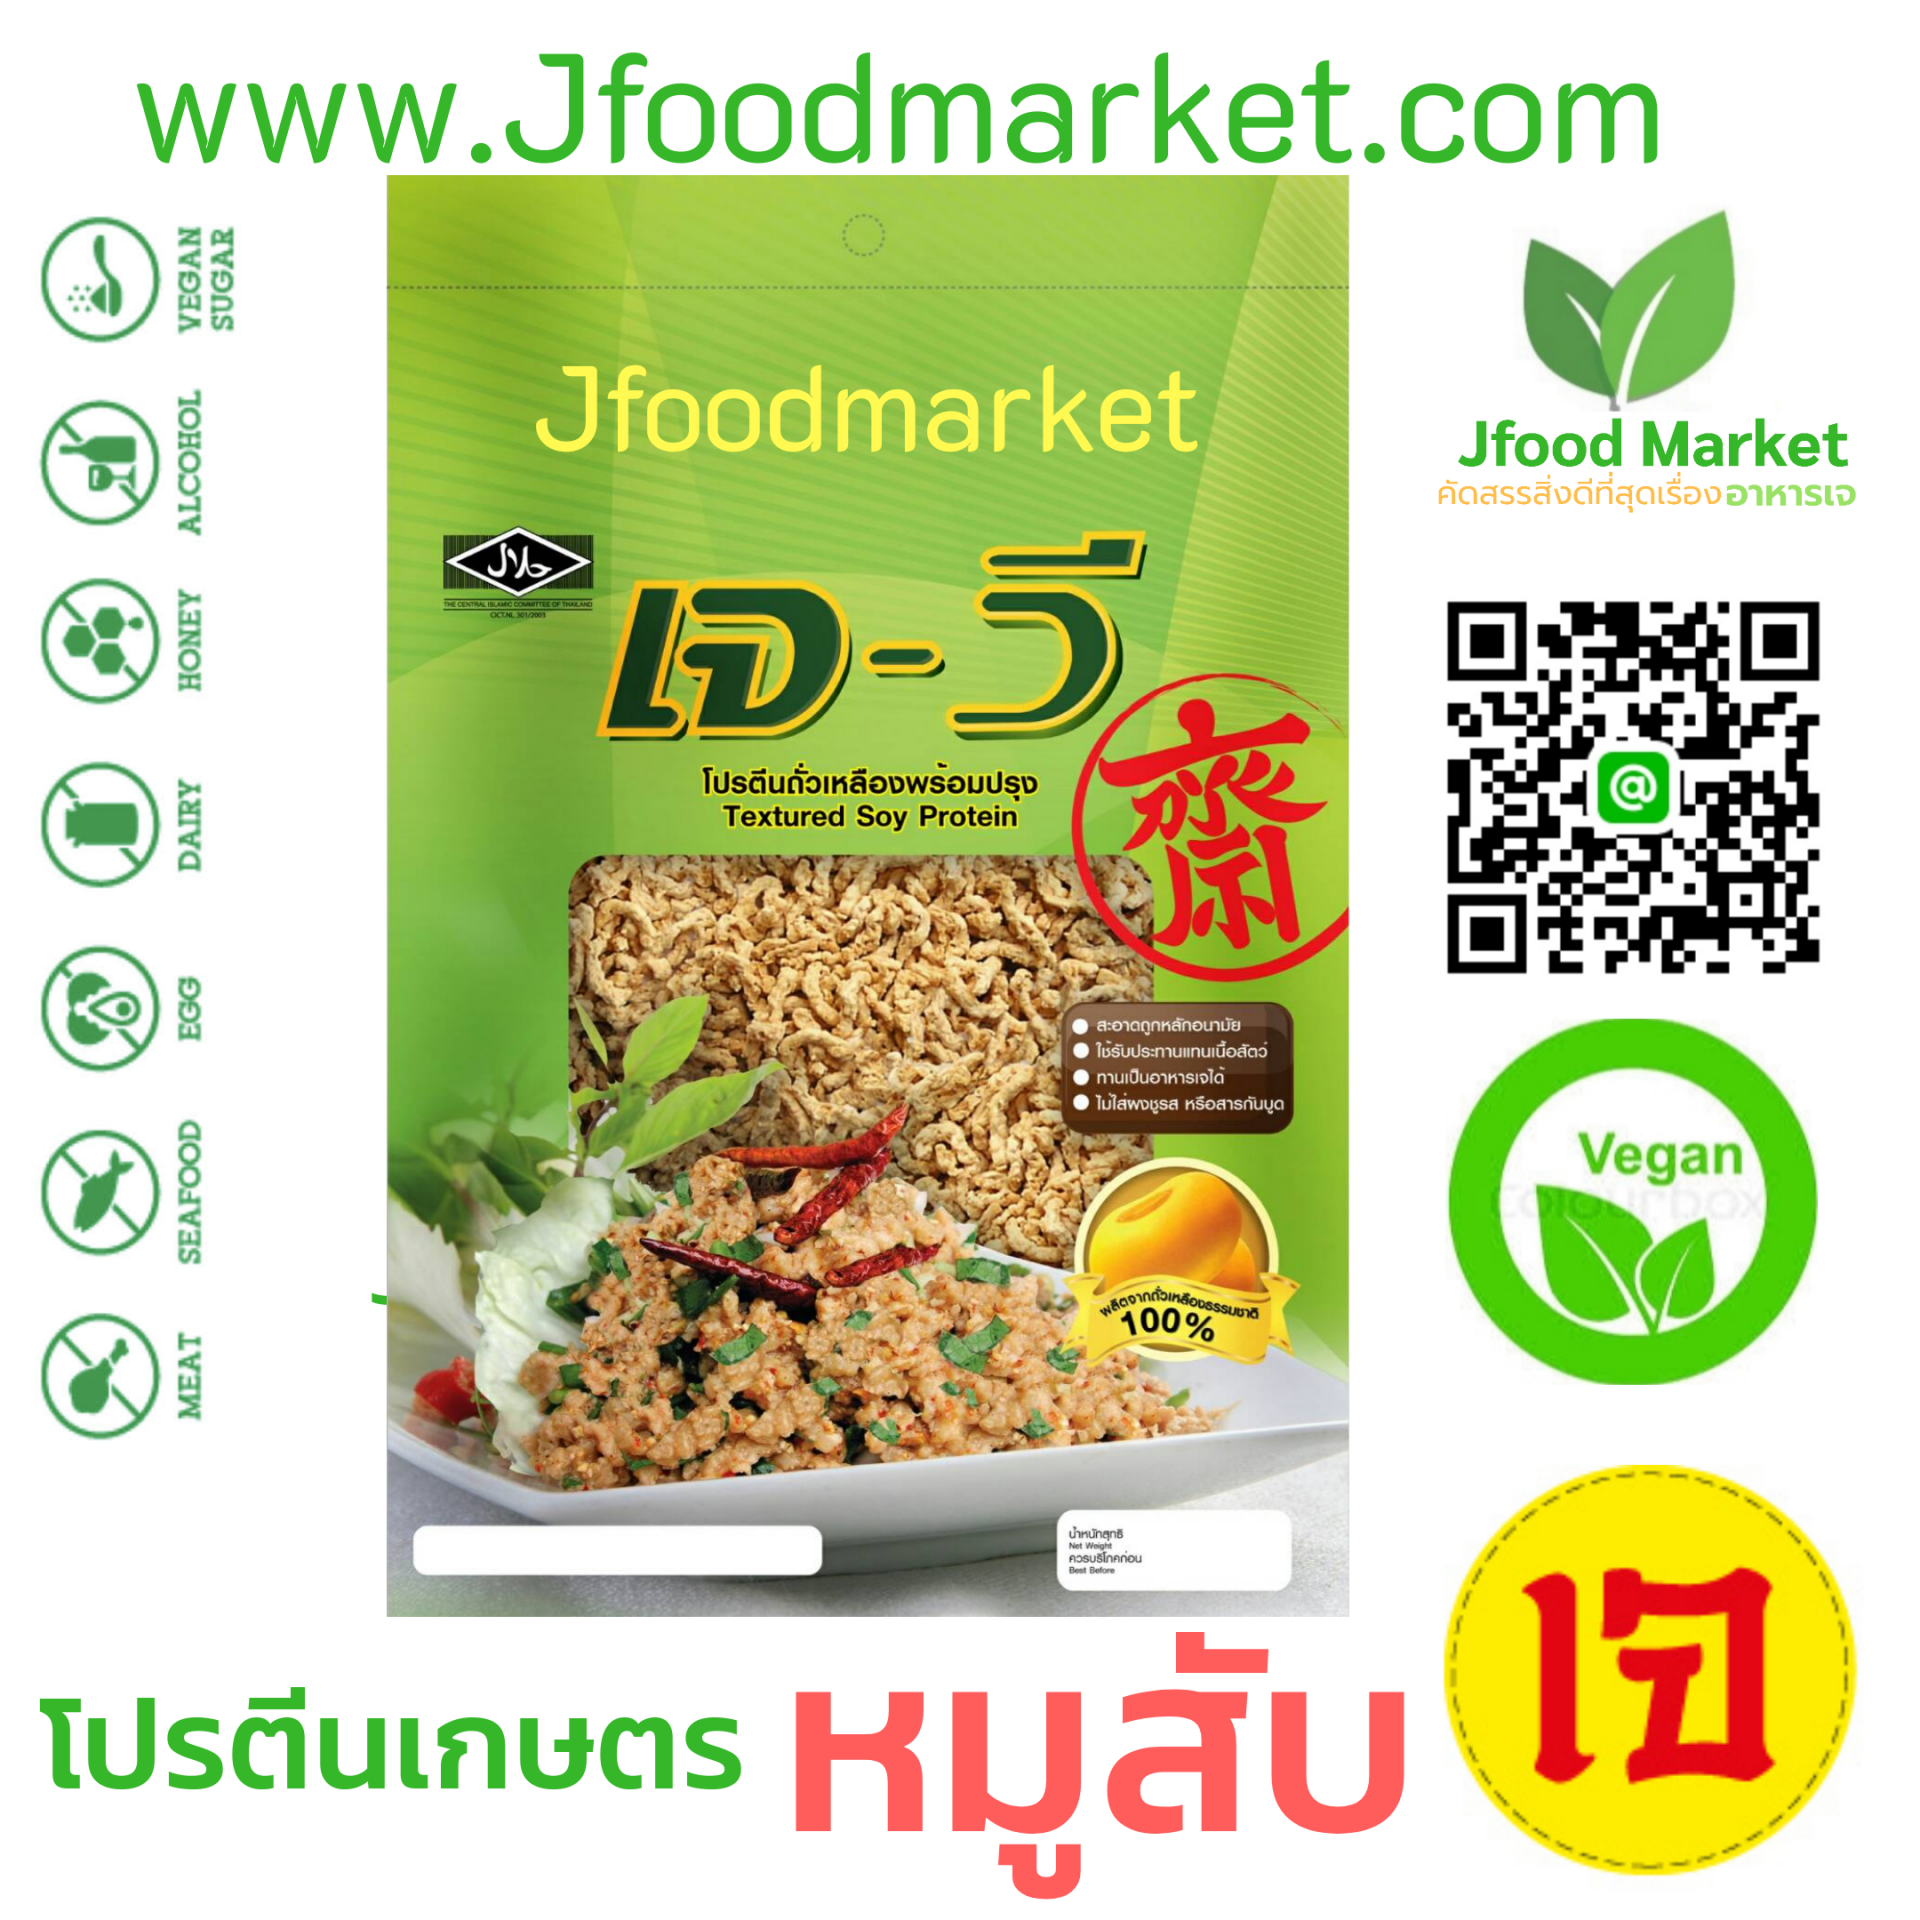 Textured Vegetable Protein/Textured Soy Protein  size 100 g.